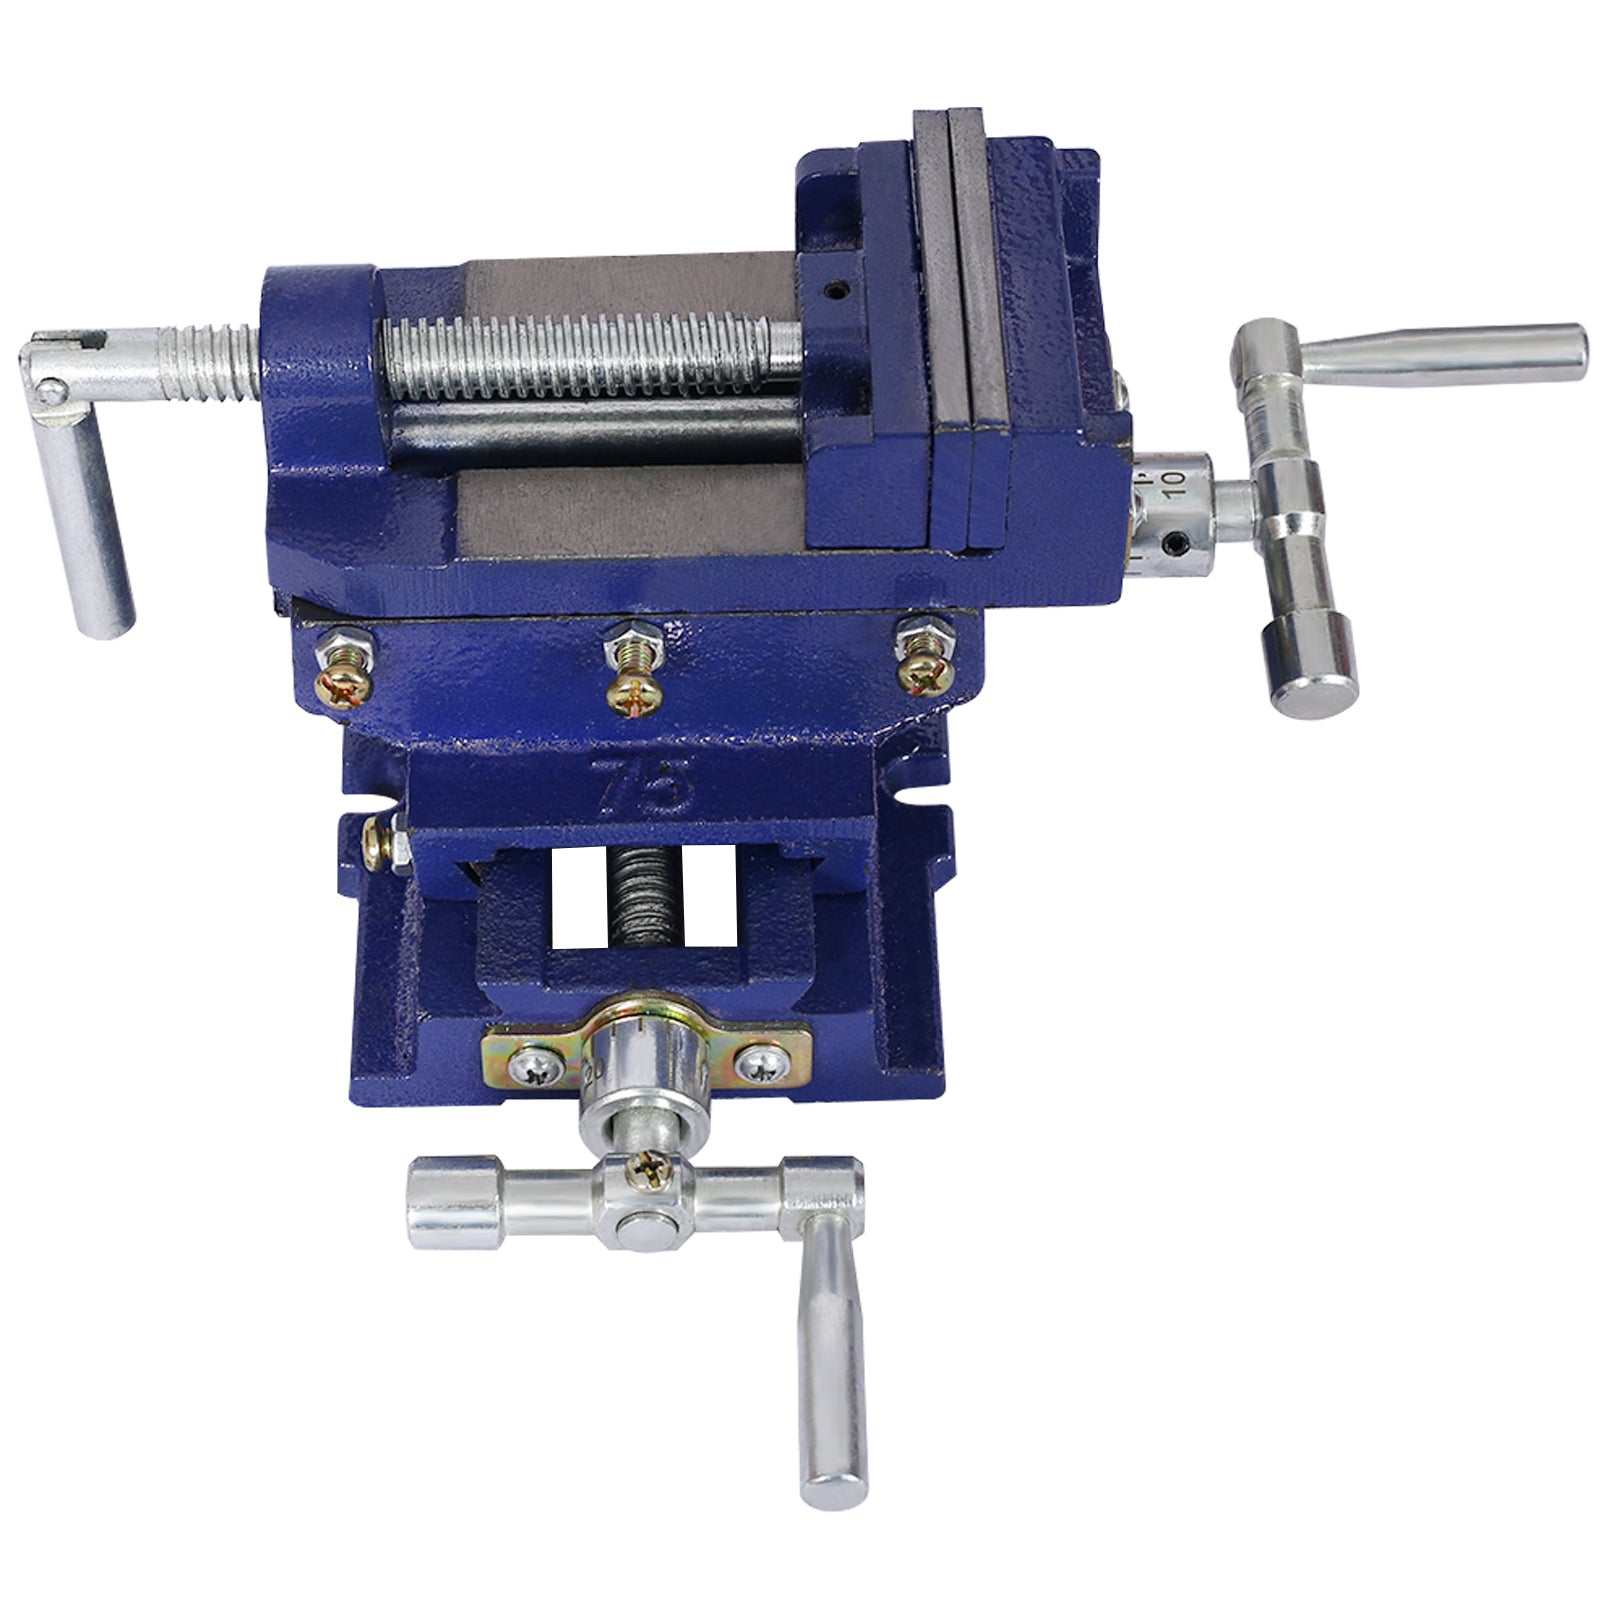 Cross slide vise, Drill Press Vise 3inch,drill press metal milling 2 way X-Y ,benchtop wood working clamp machine - Tonkn